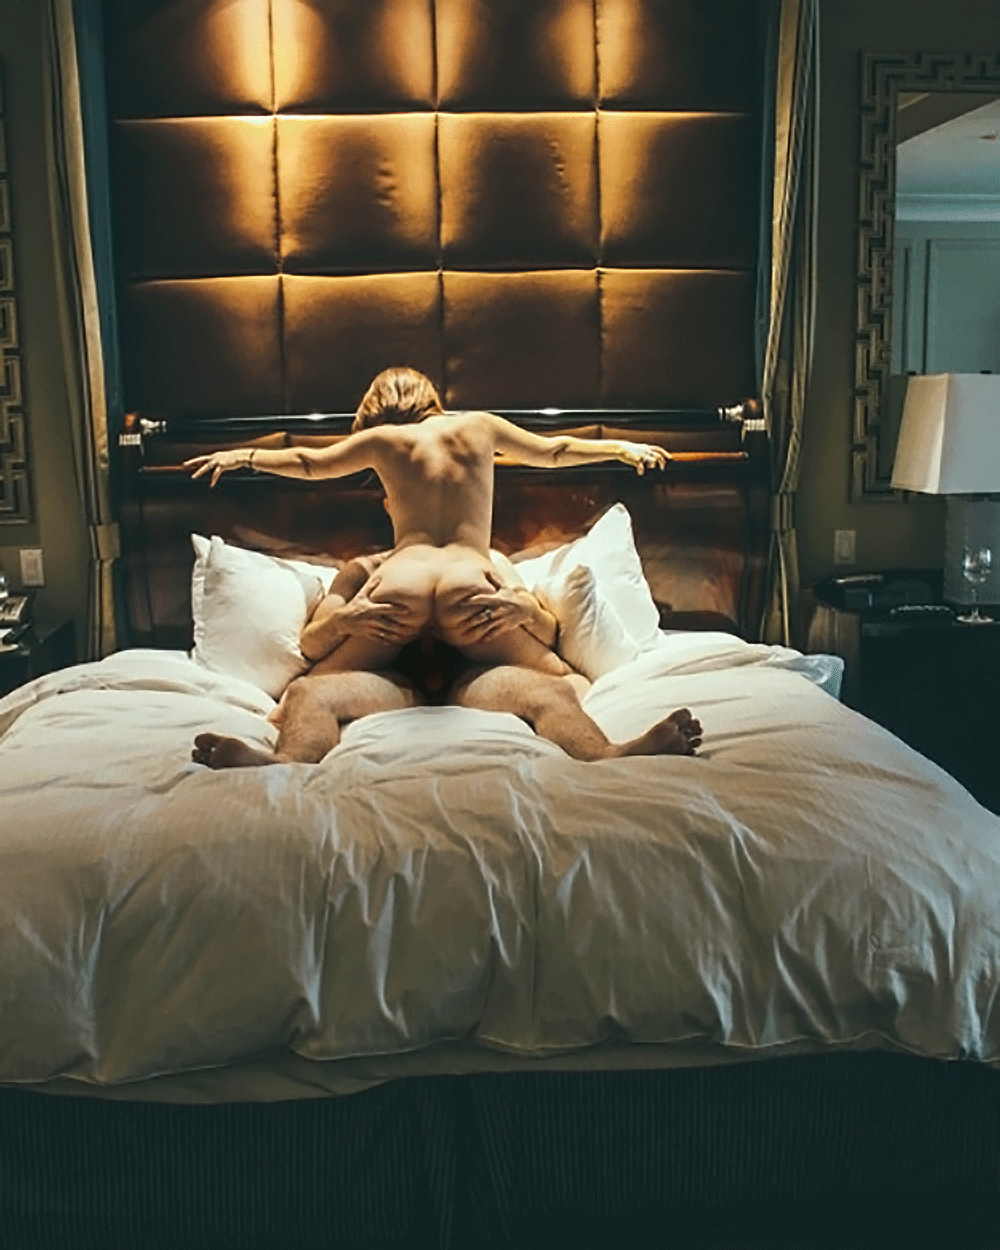 Naughty hotel sex, 5 reasons why you need some hotel sex in your life